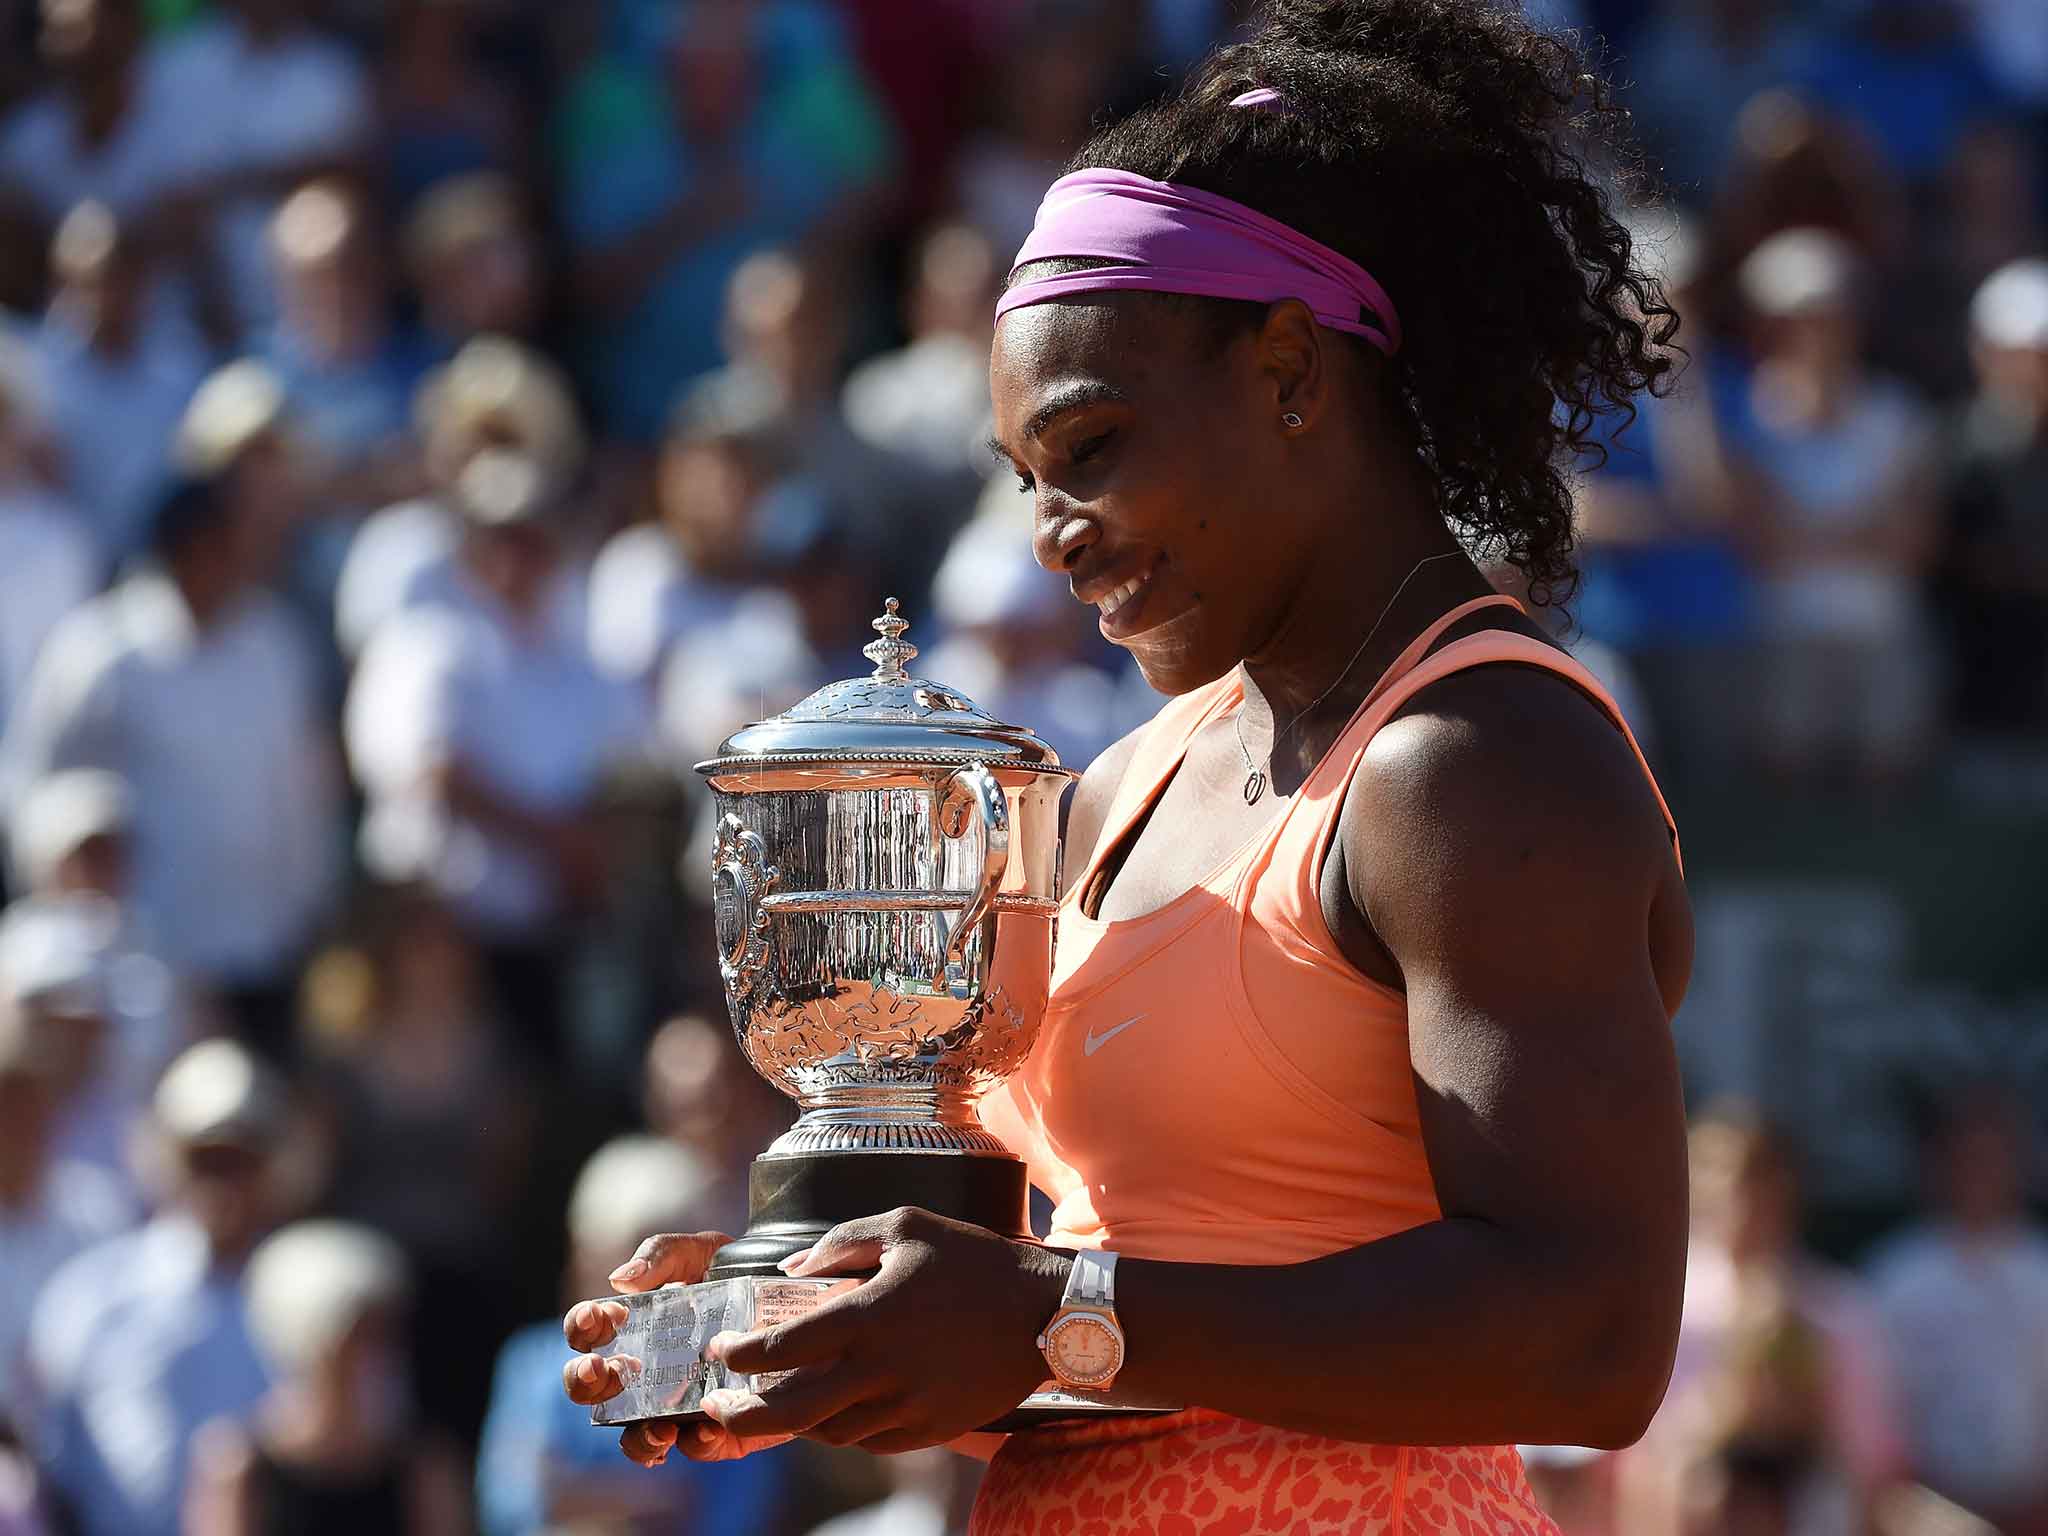 Serena Williams pictured with the French Open trophy after defeating Lucie Safarova